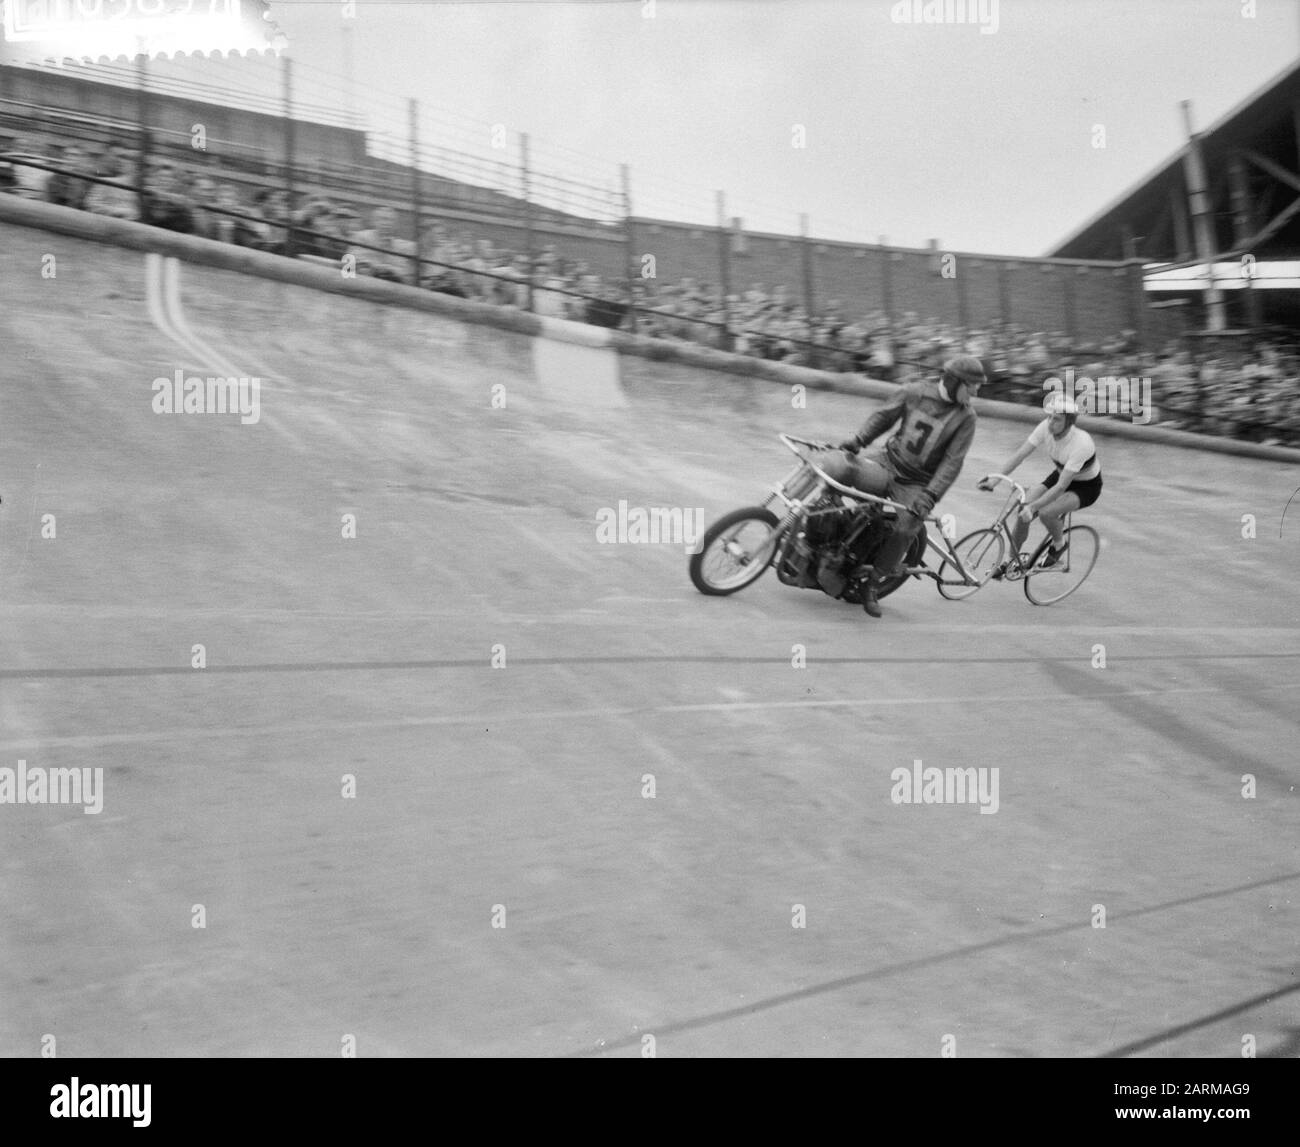 World Championship cycling on the track in Amsterdam Holz (W.Dld.) during stayeren pros Date: August 14, 1959 Location: Amsterdam Keywords: track cycling Stock Photo